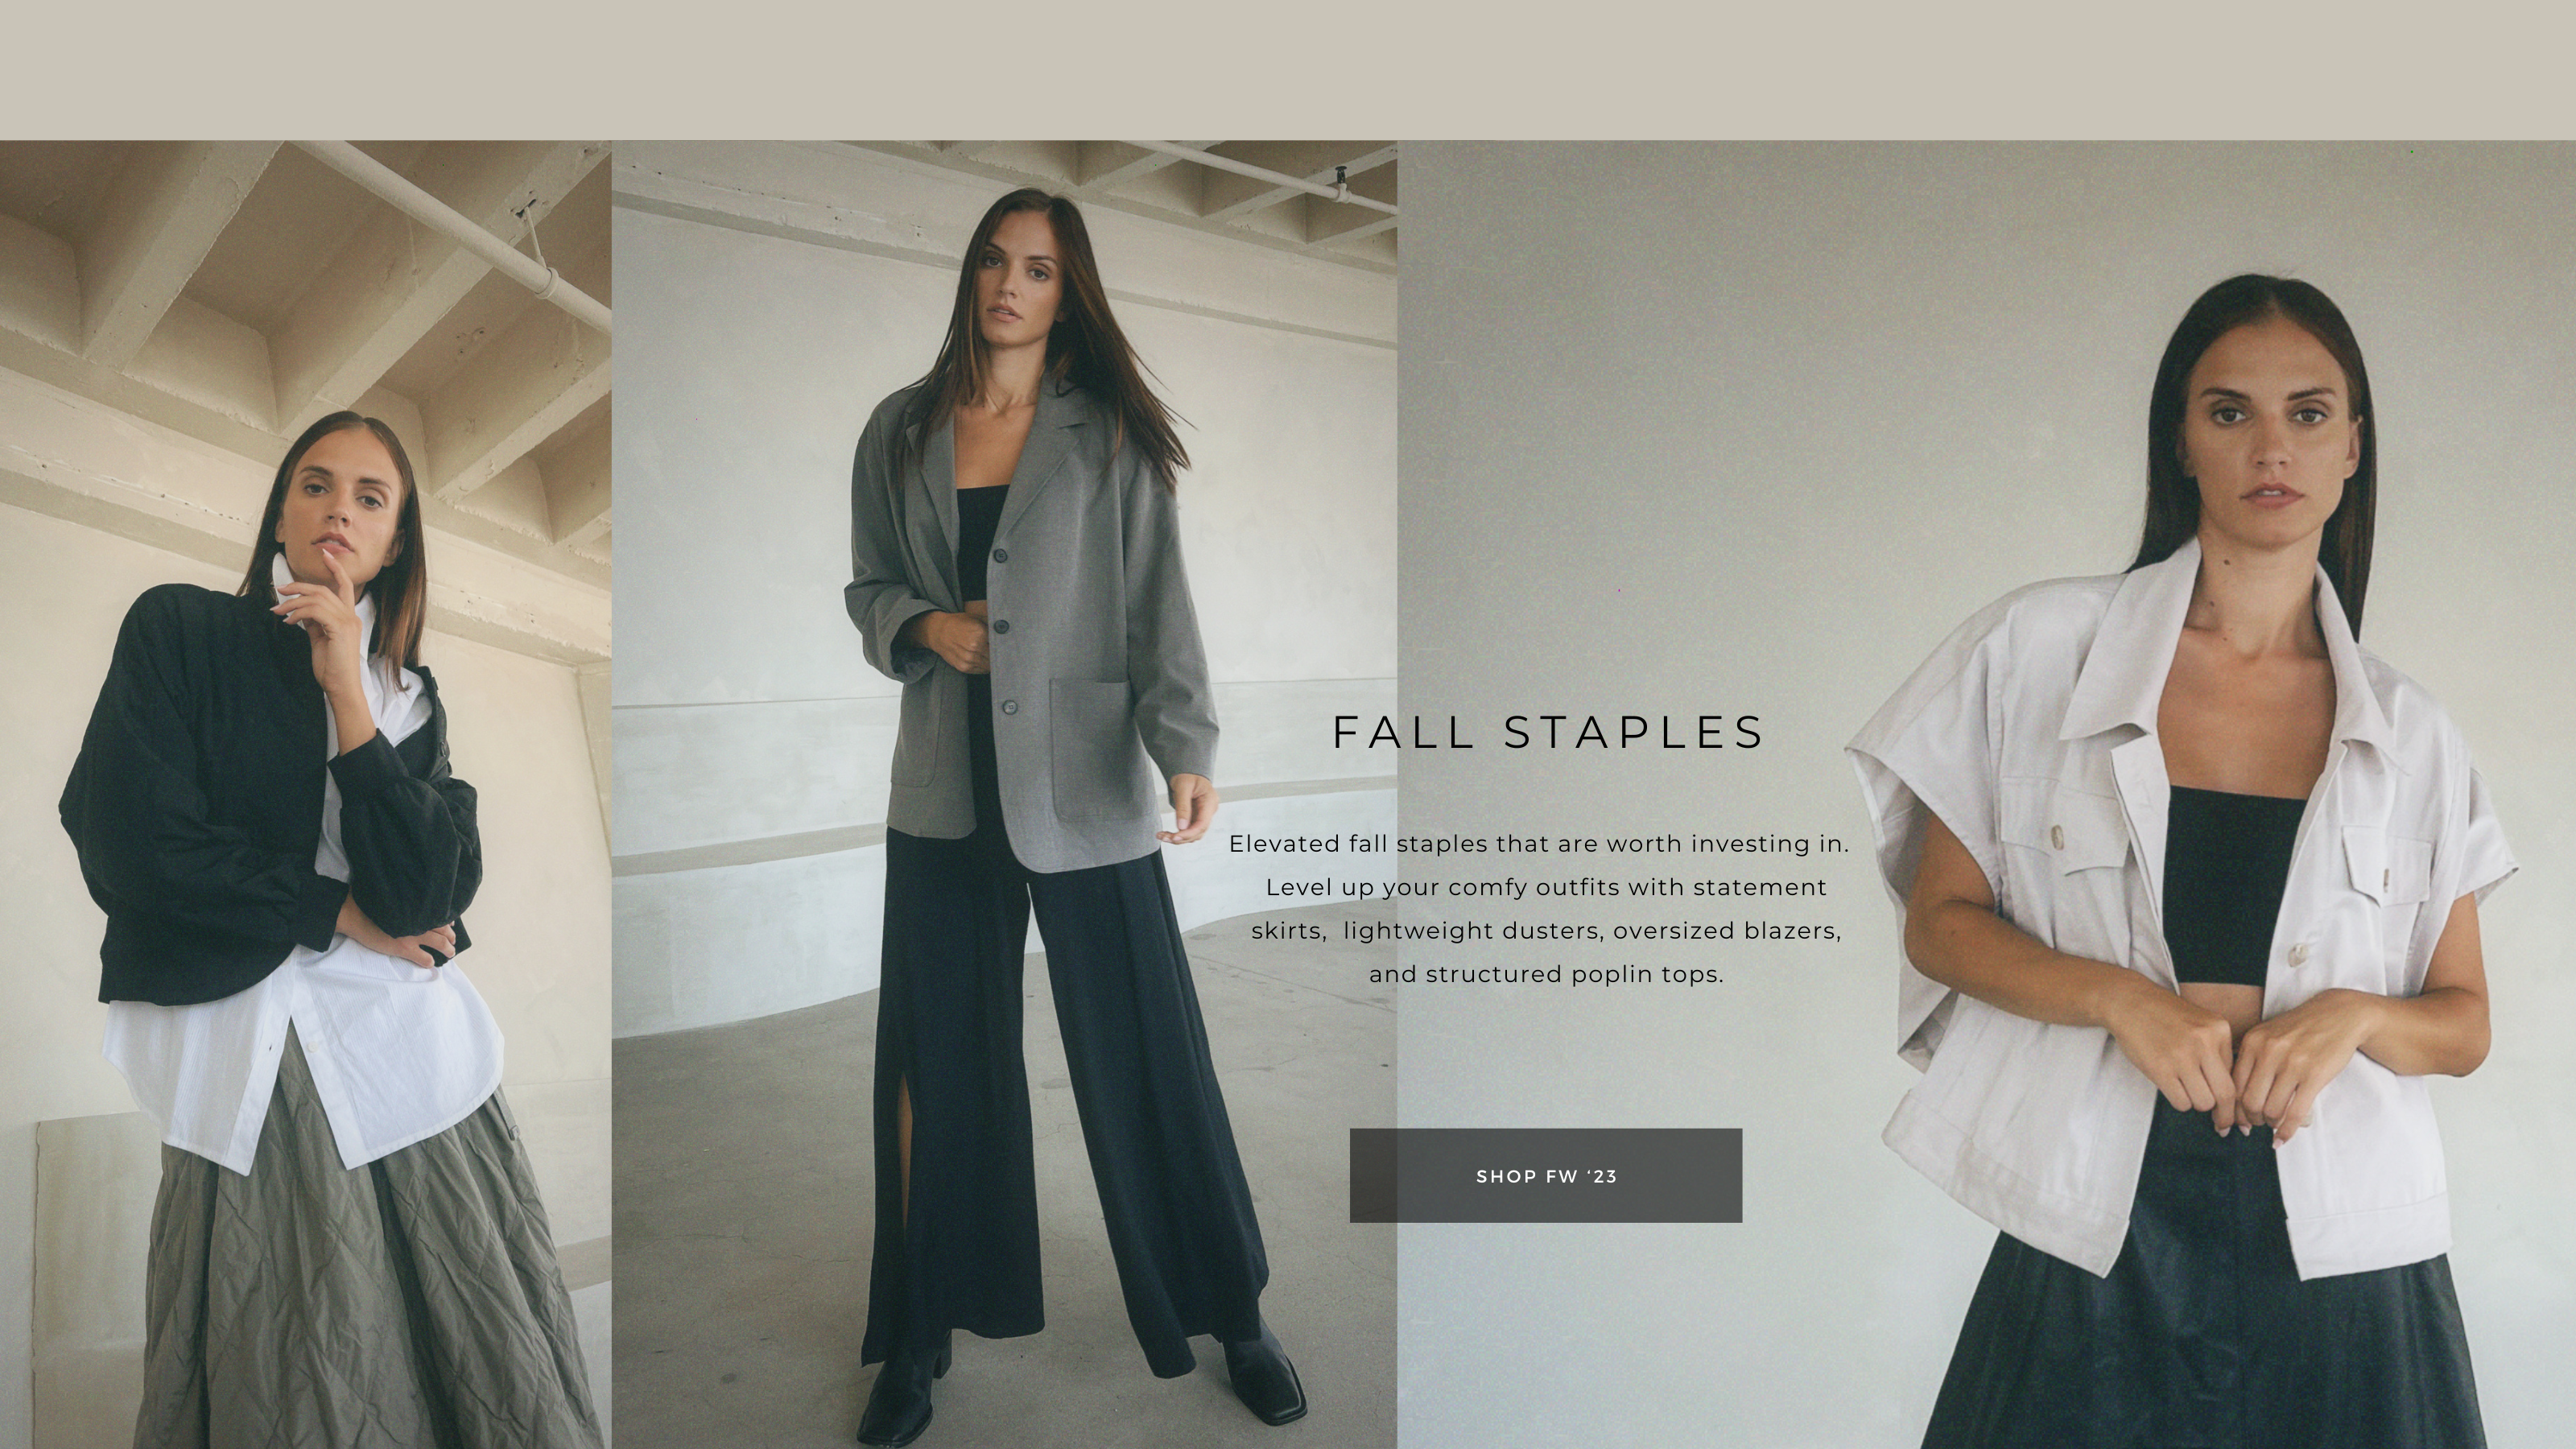 Fall Staples.  Elevated fall staples that are worth investing in.  Level up your comfy outfits with statement skirts, lightweight dusters, oversized blazers, and structured poplin tops.